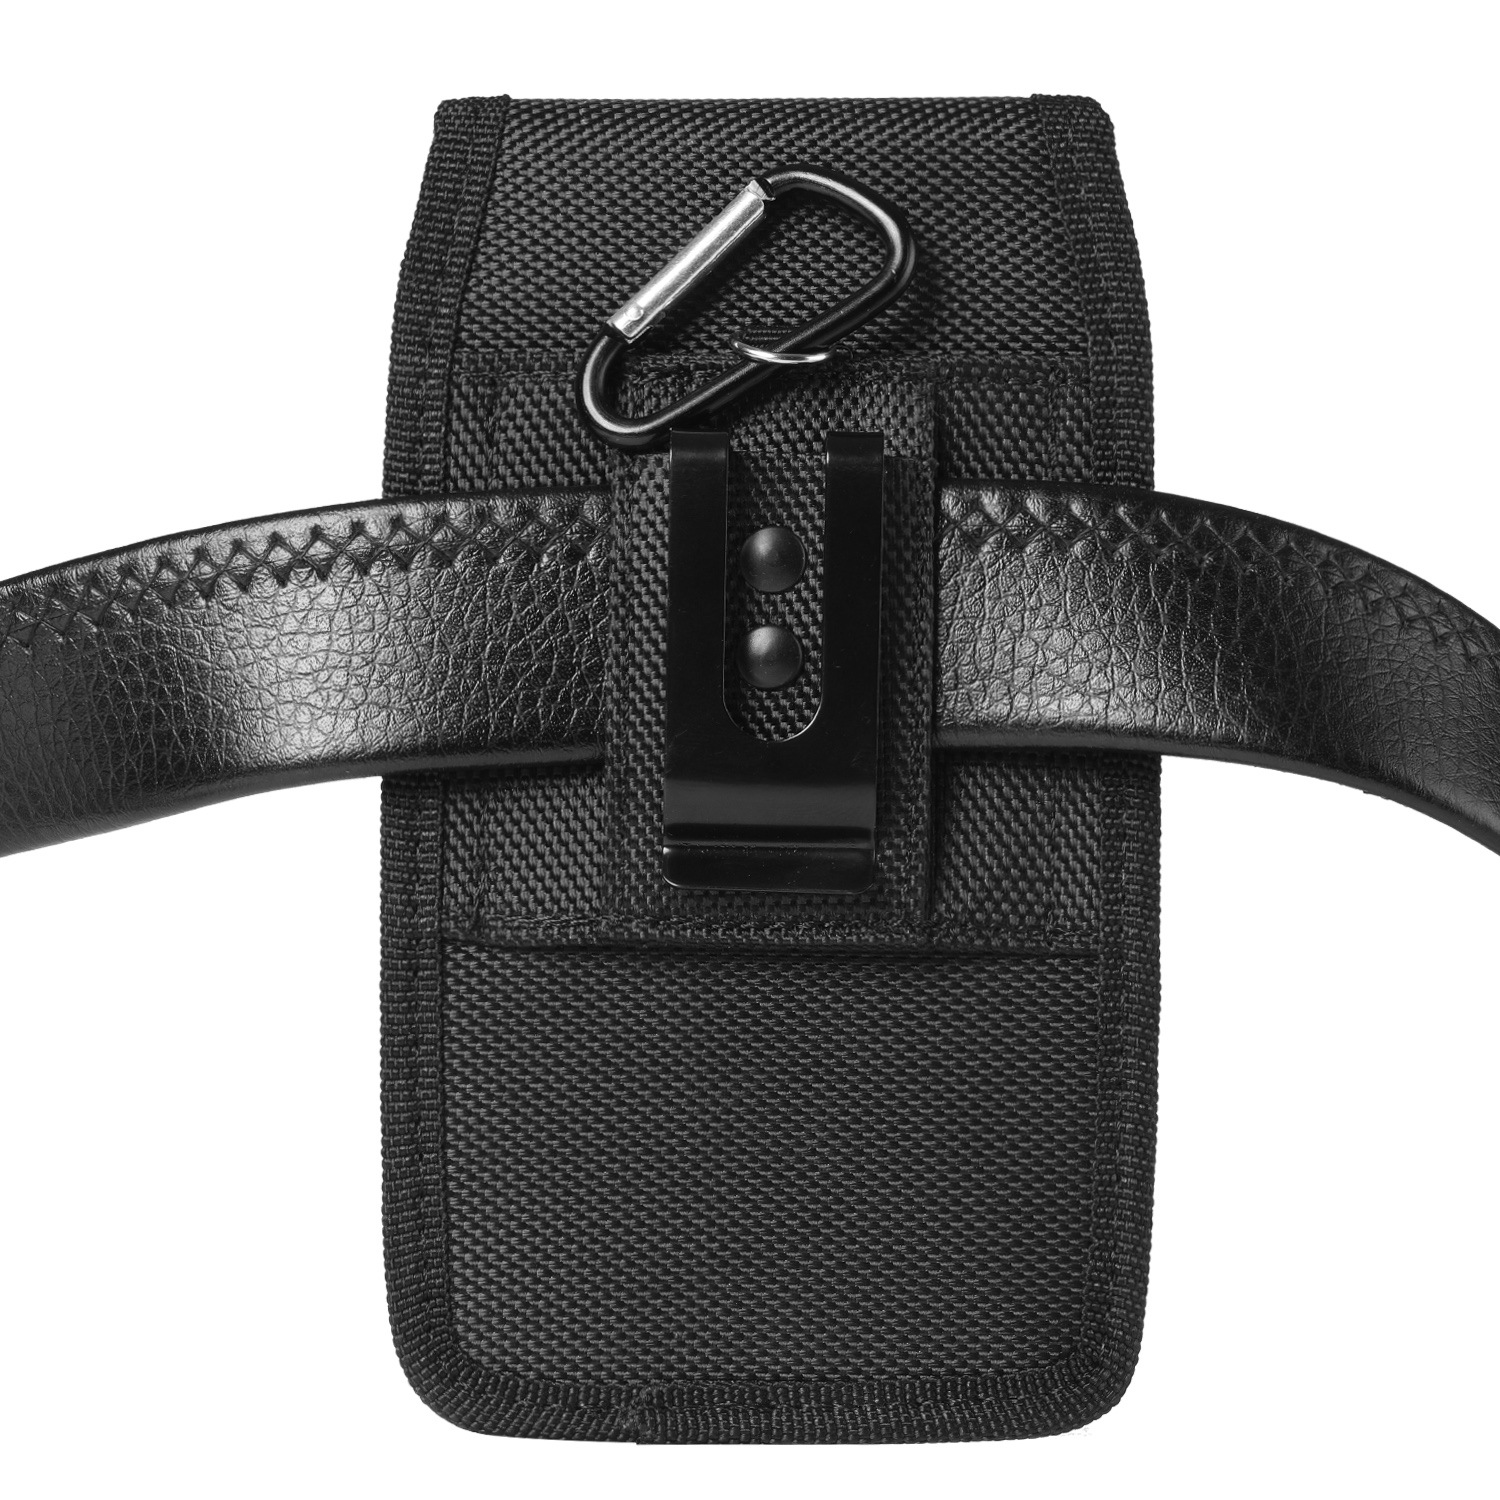 Suitable for iPhone15 vertical MAX leather case card Oxford cloth nylon fabric belt mobile phone waist bag